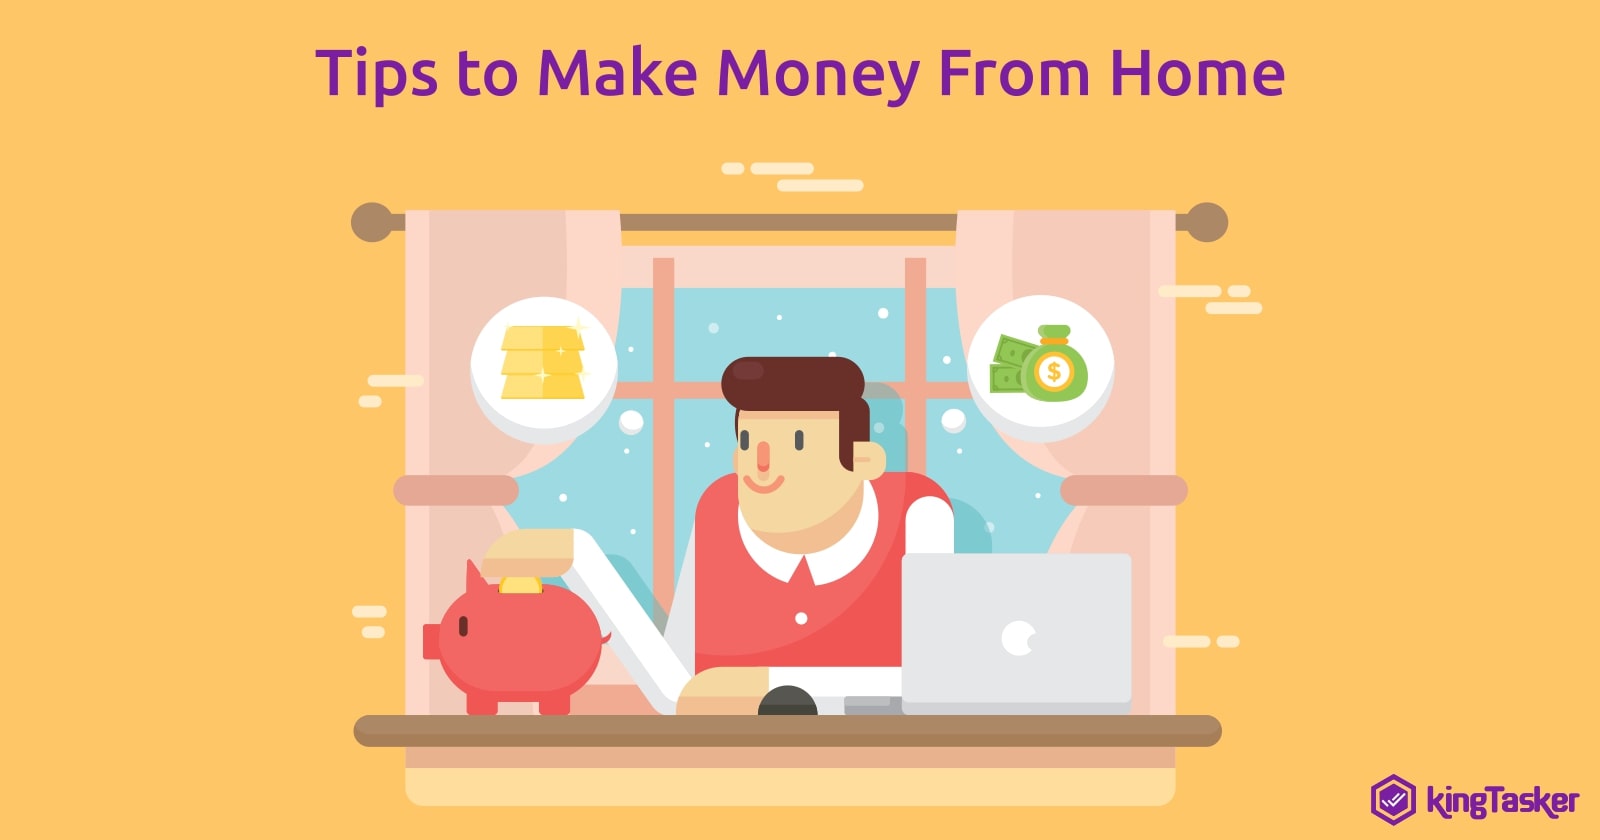 Learn How You Can Make Money From Home